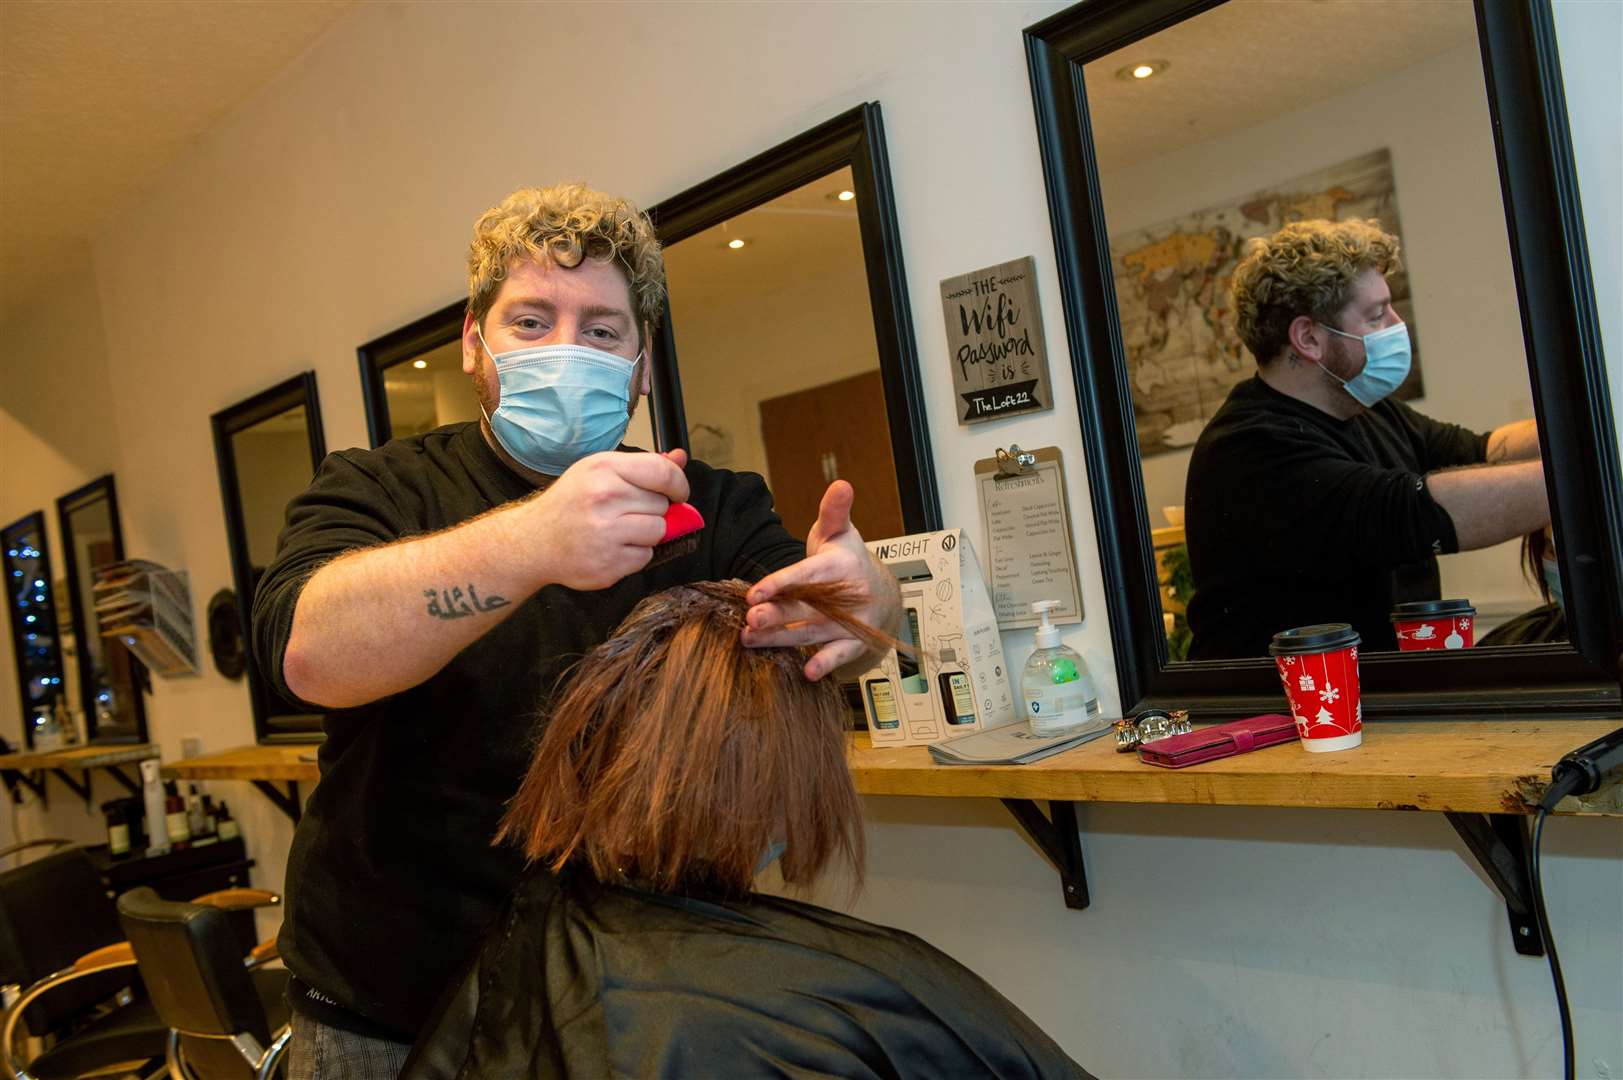 Allan Mackenzie, at The Loft salon, will be providing free haircuts for the homeless and less well-off families.